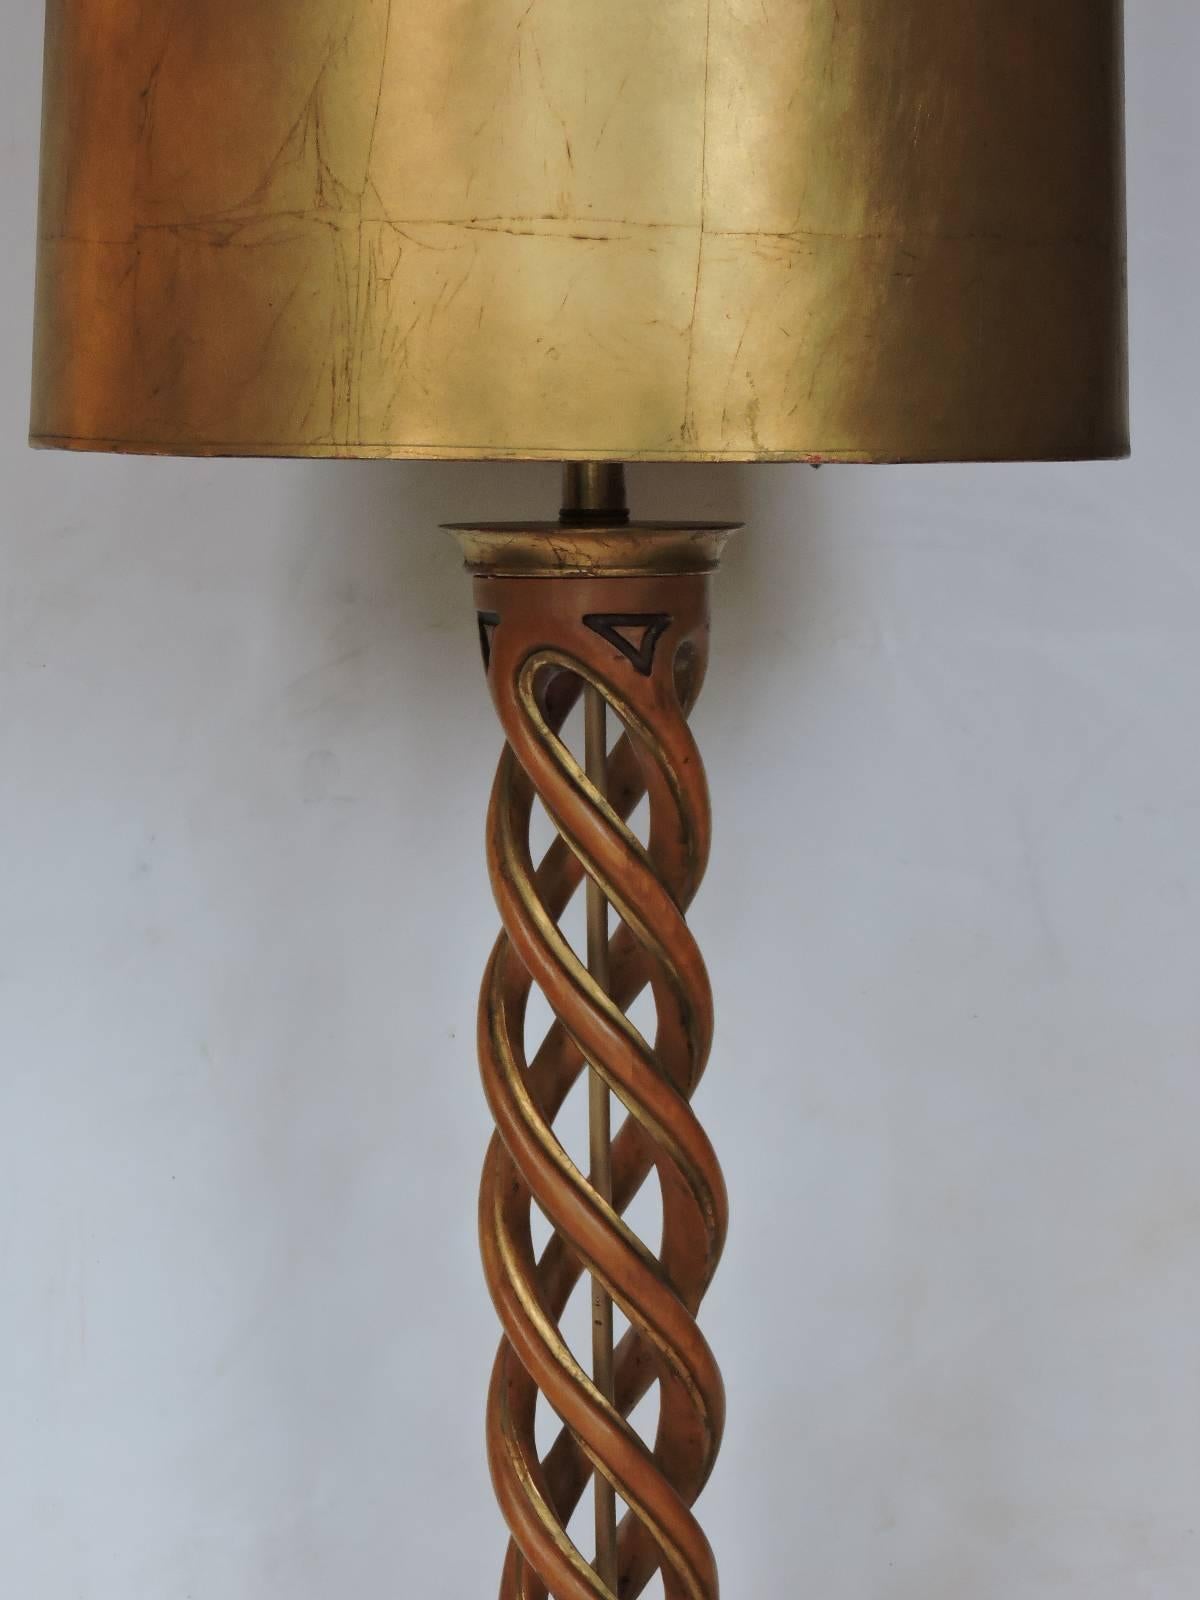 A tall spiral helix lamp by Frederick Cooper Studios attributed to James Mont with beautifully aged color to wood and gilding. Great all original condition.